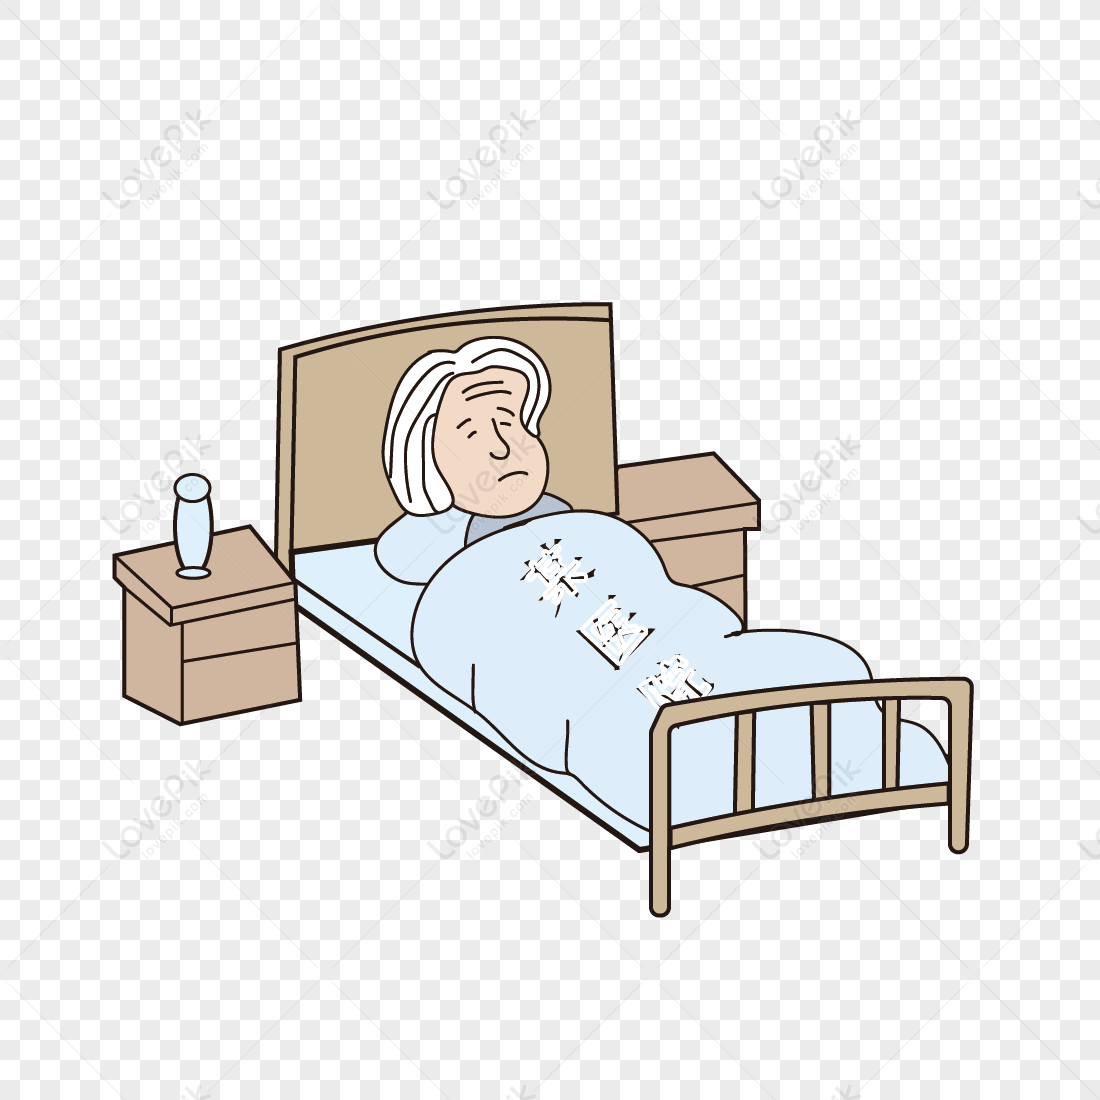 A Sick Grandmother PNG Image Free Download And Clipart Image For Free  Download - Lovepik | 400257801